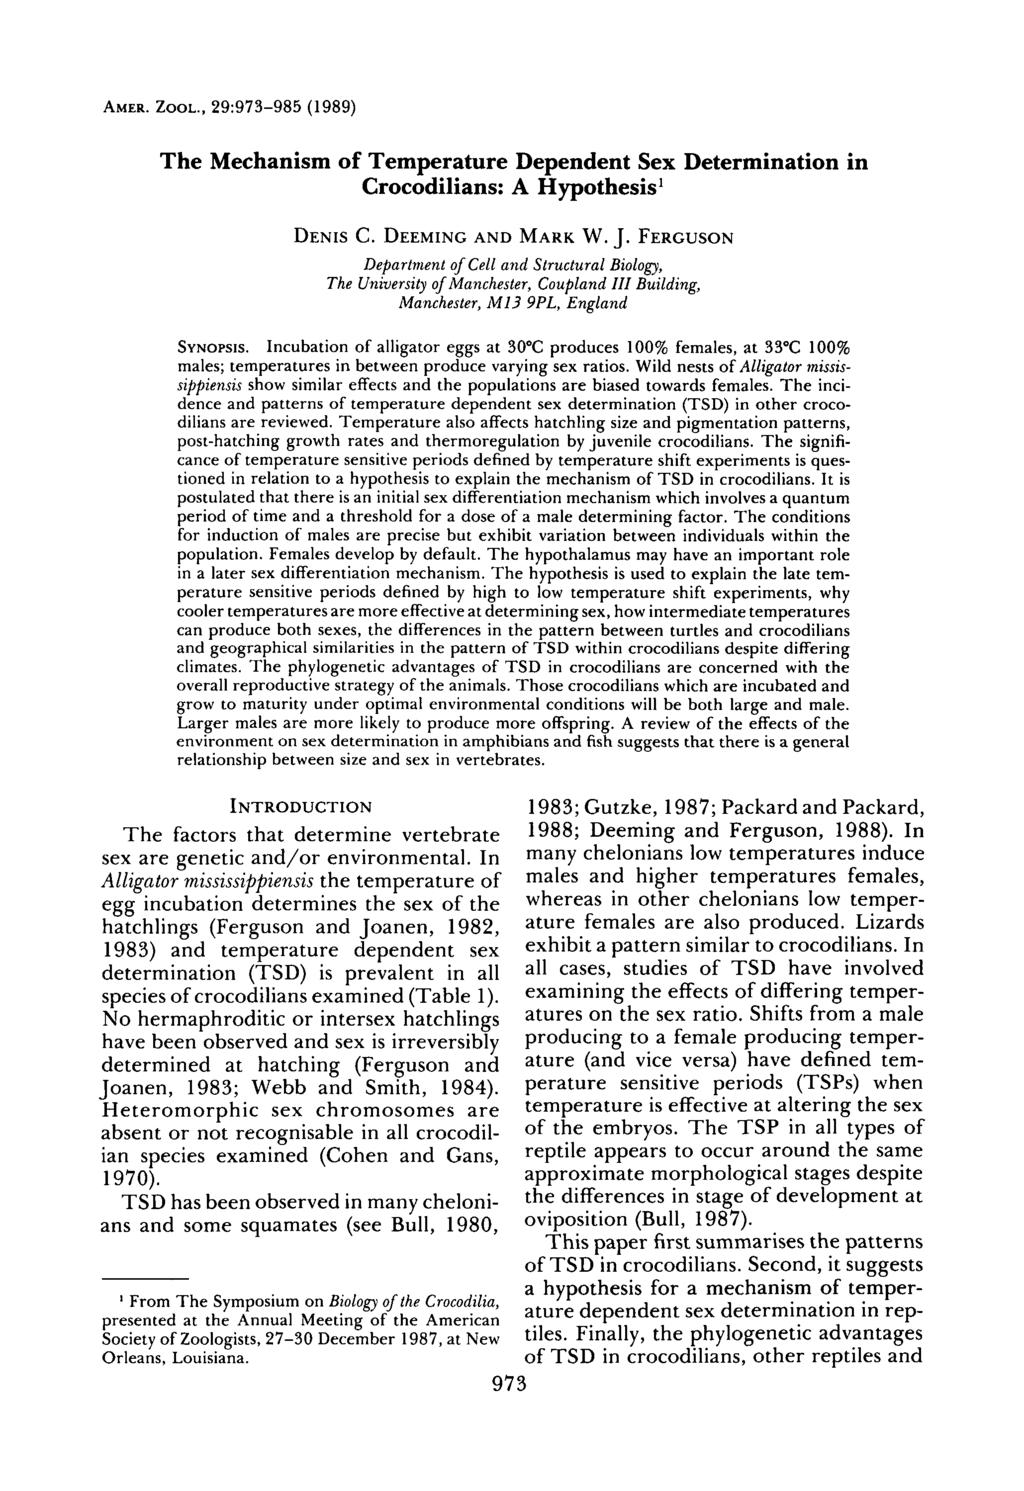 AMER. ZOOL., 29:973-985 (1989) The Mechanism of Temperature Dependent Sex Determination in Crocodilians: A Hypothesis 1 DENIS C. DEEMING AND MARK W. J.